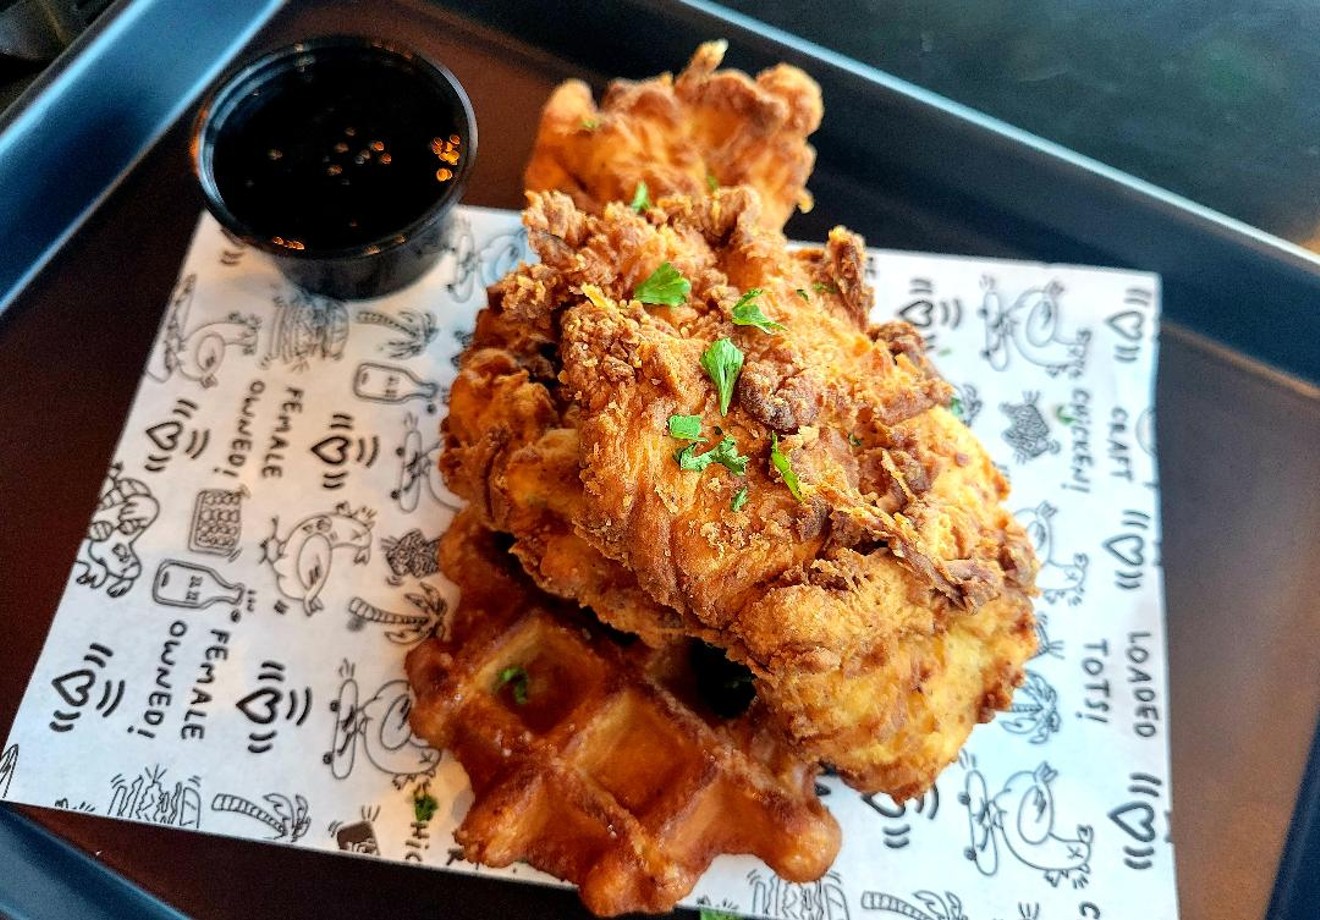 Chicken and waffles come with a super crispy Belgian-style waffle.